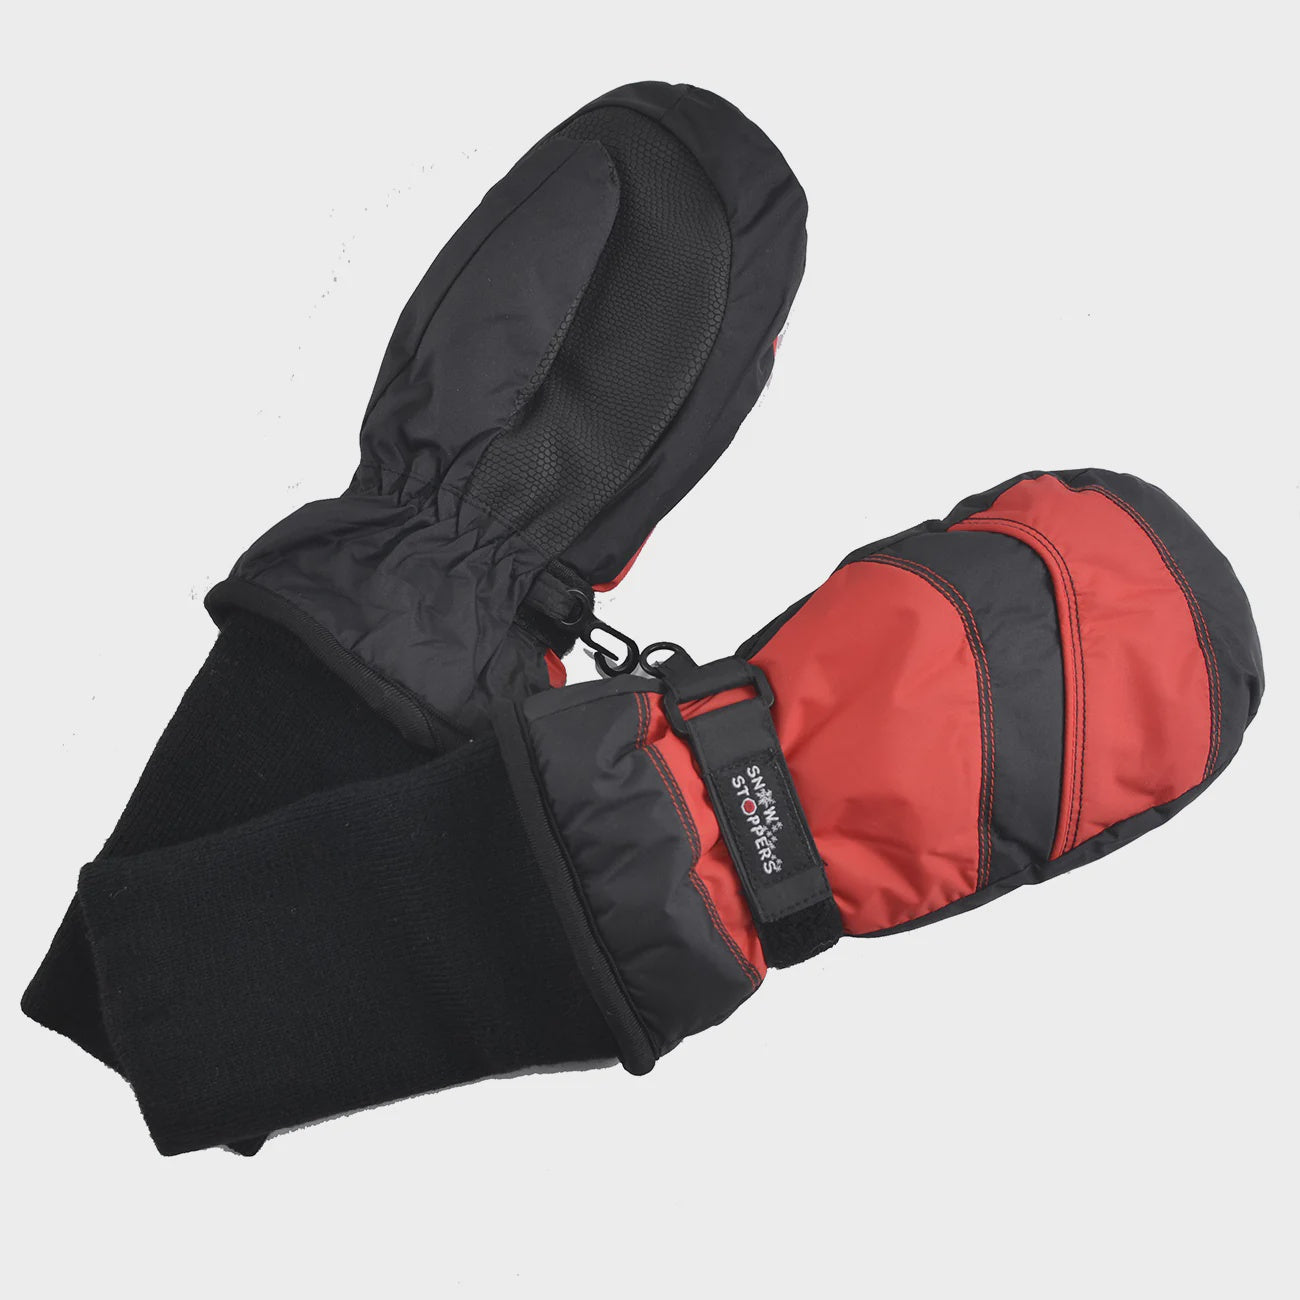 Mittens - Two Tone Black/Red